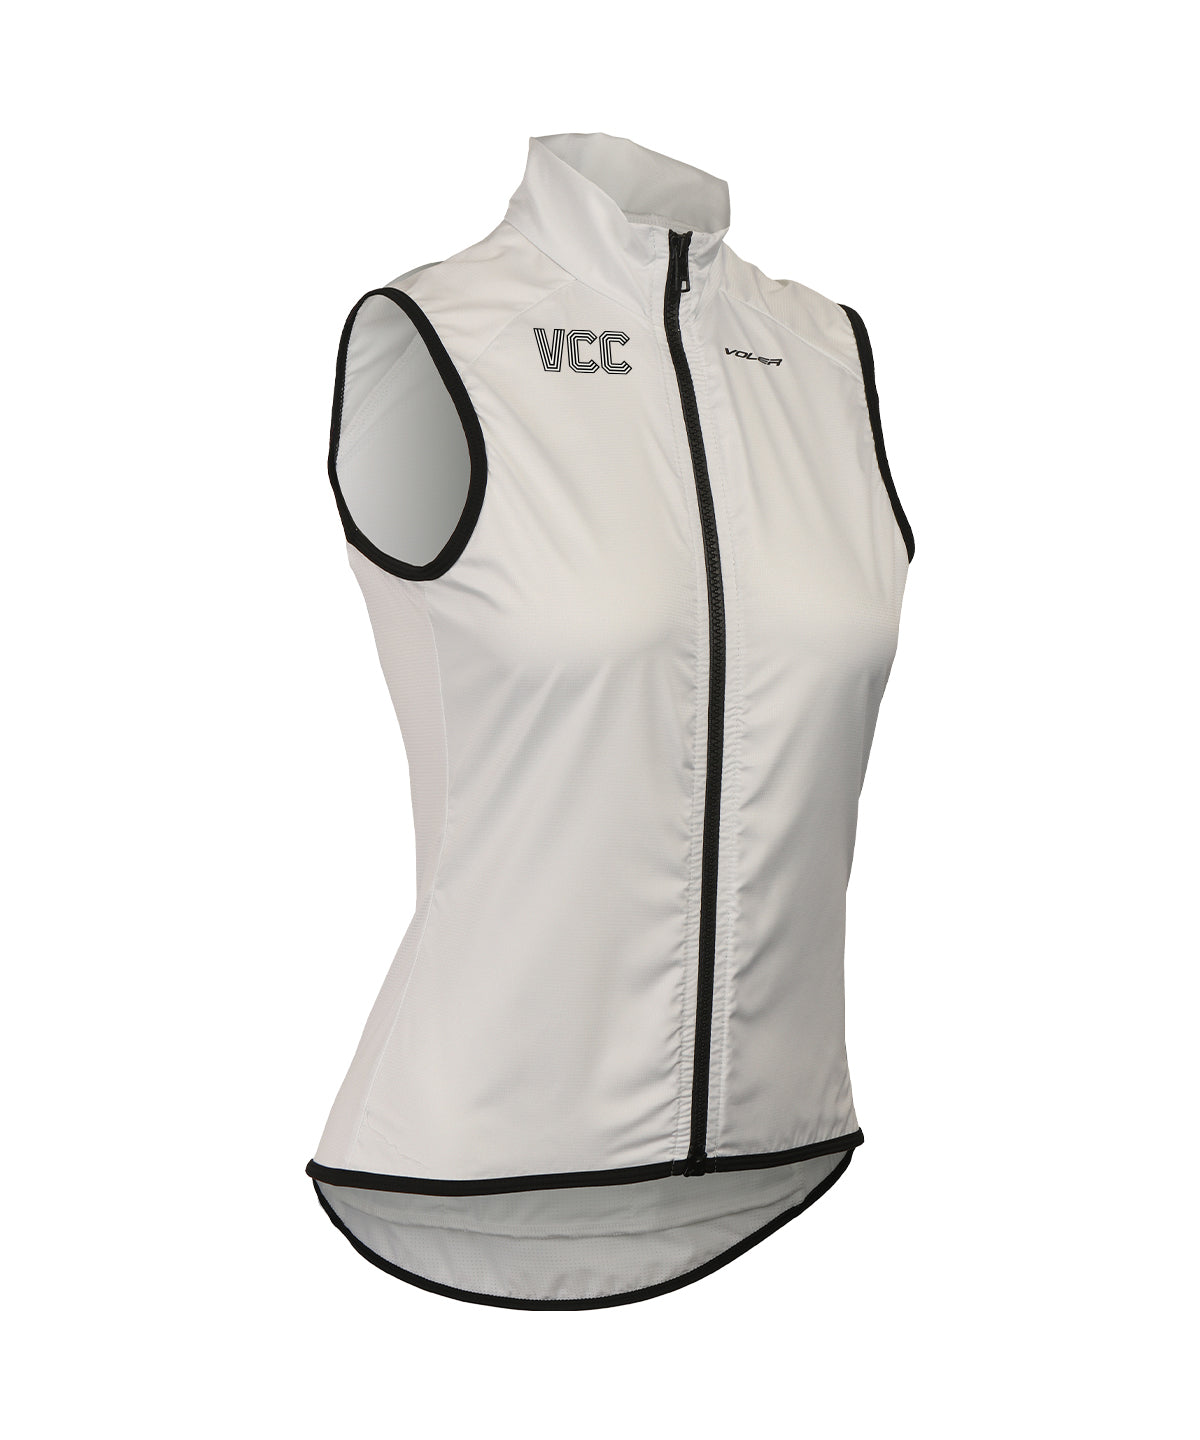 W. WIND VEST - VCC MEMBERS ONLY